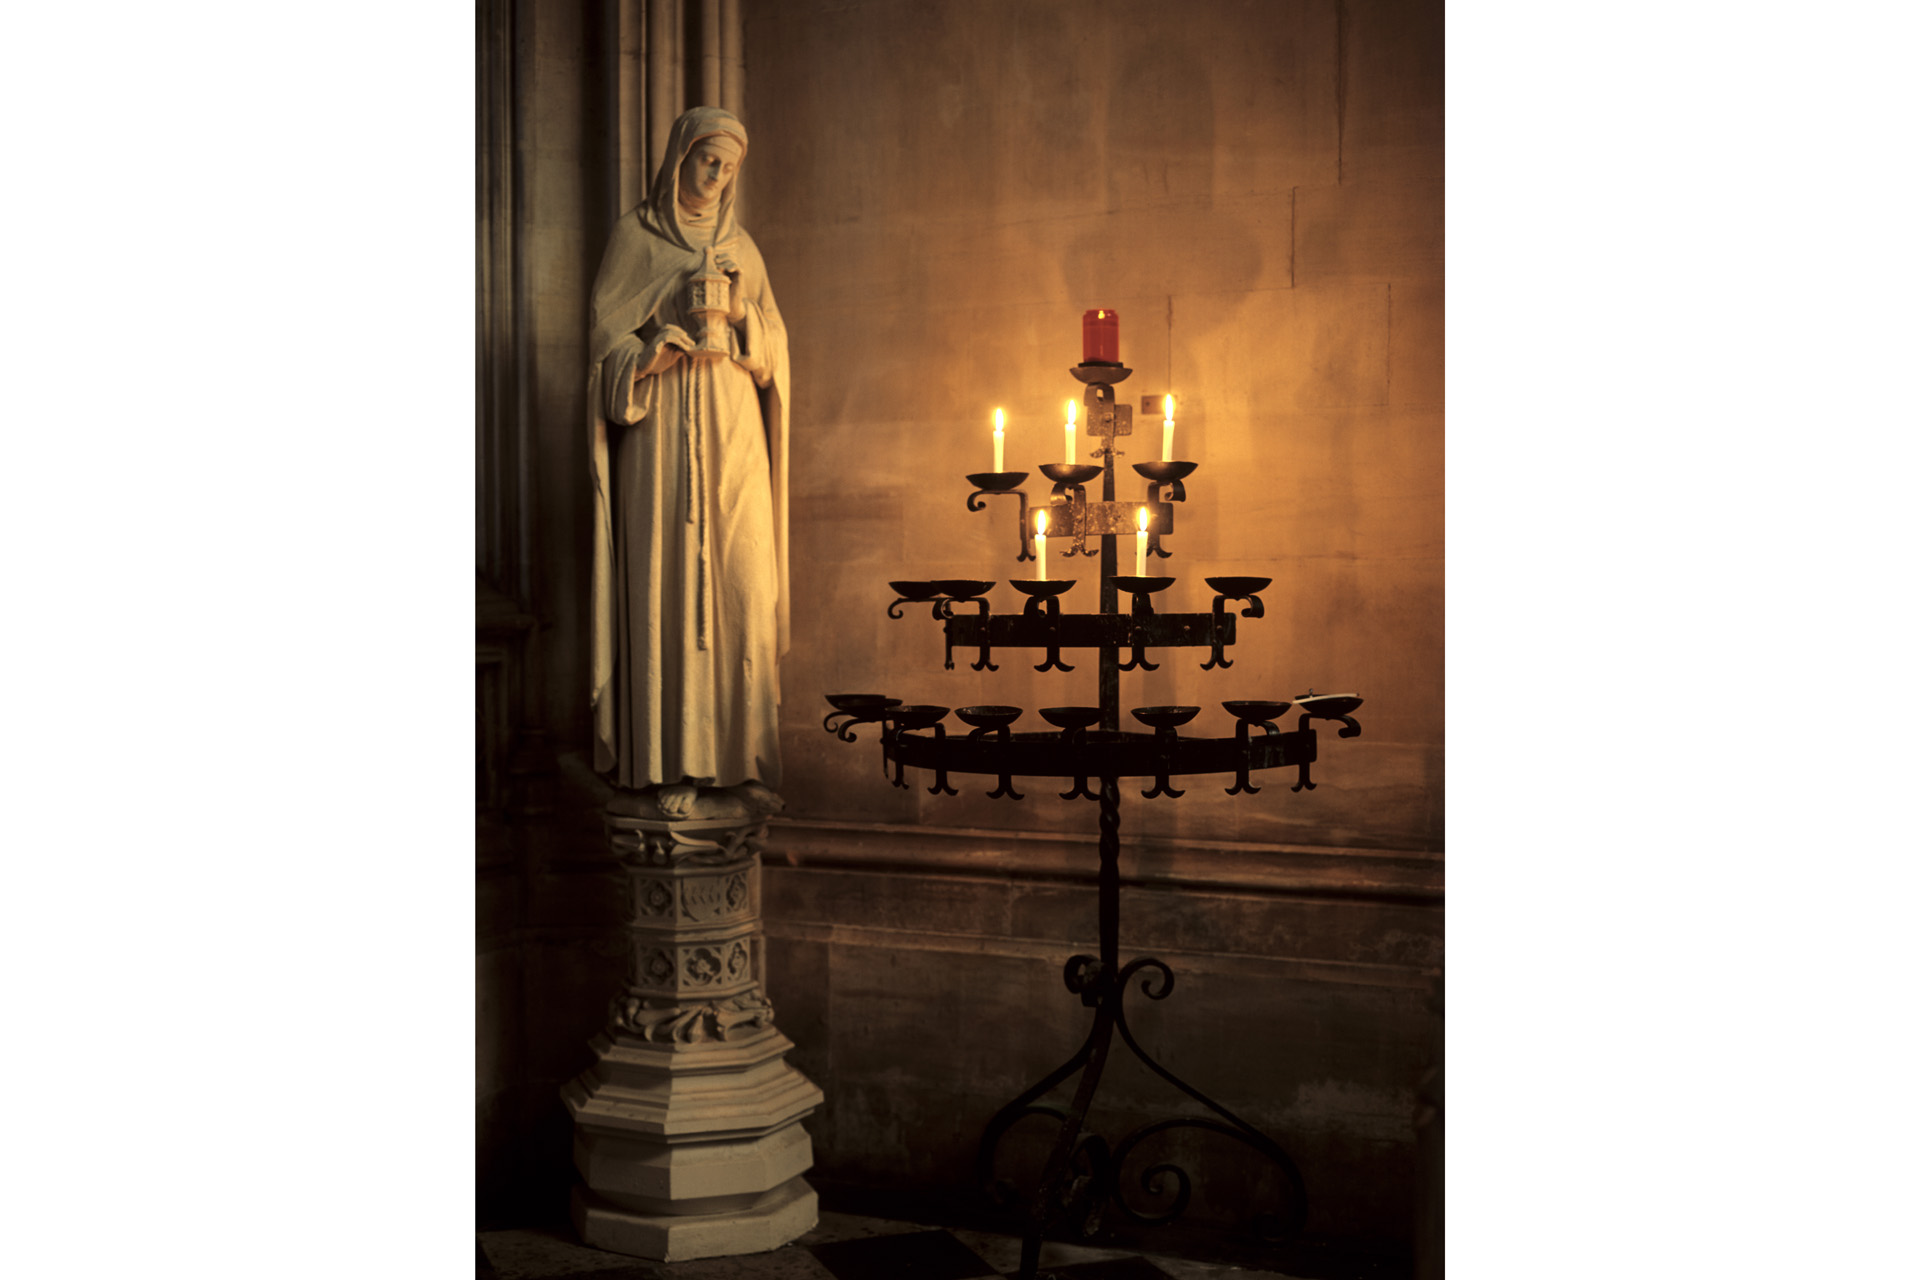 The Mary Magdalen statue in the chapel of Magdalen College Oxford University. The college was founded by William of Waynflete, Bishop of Winchester in 1395AD